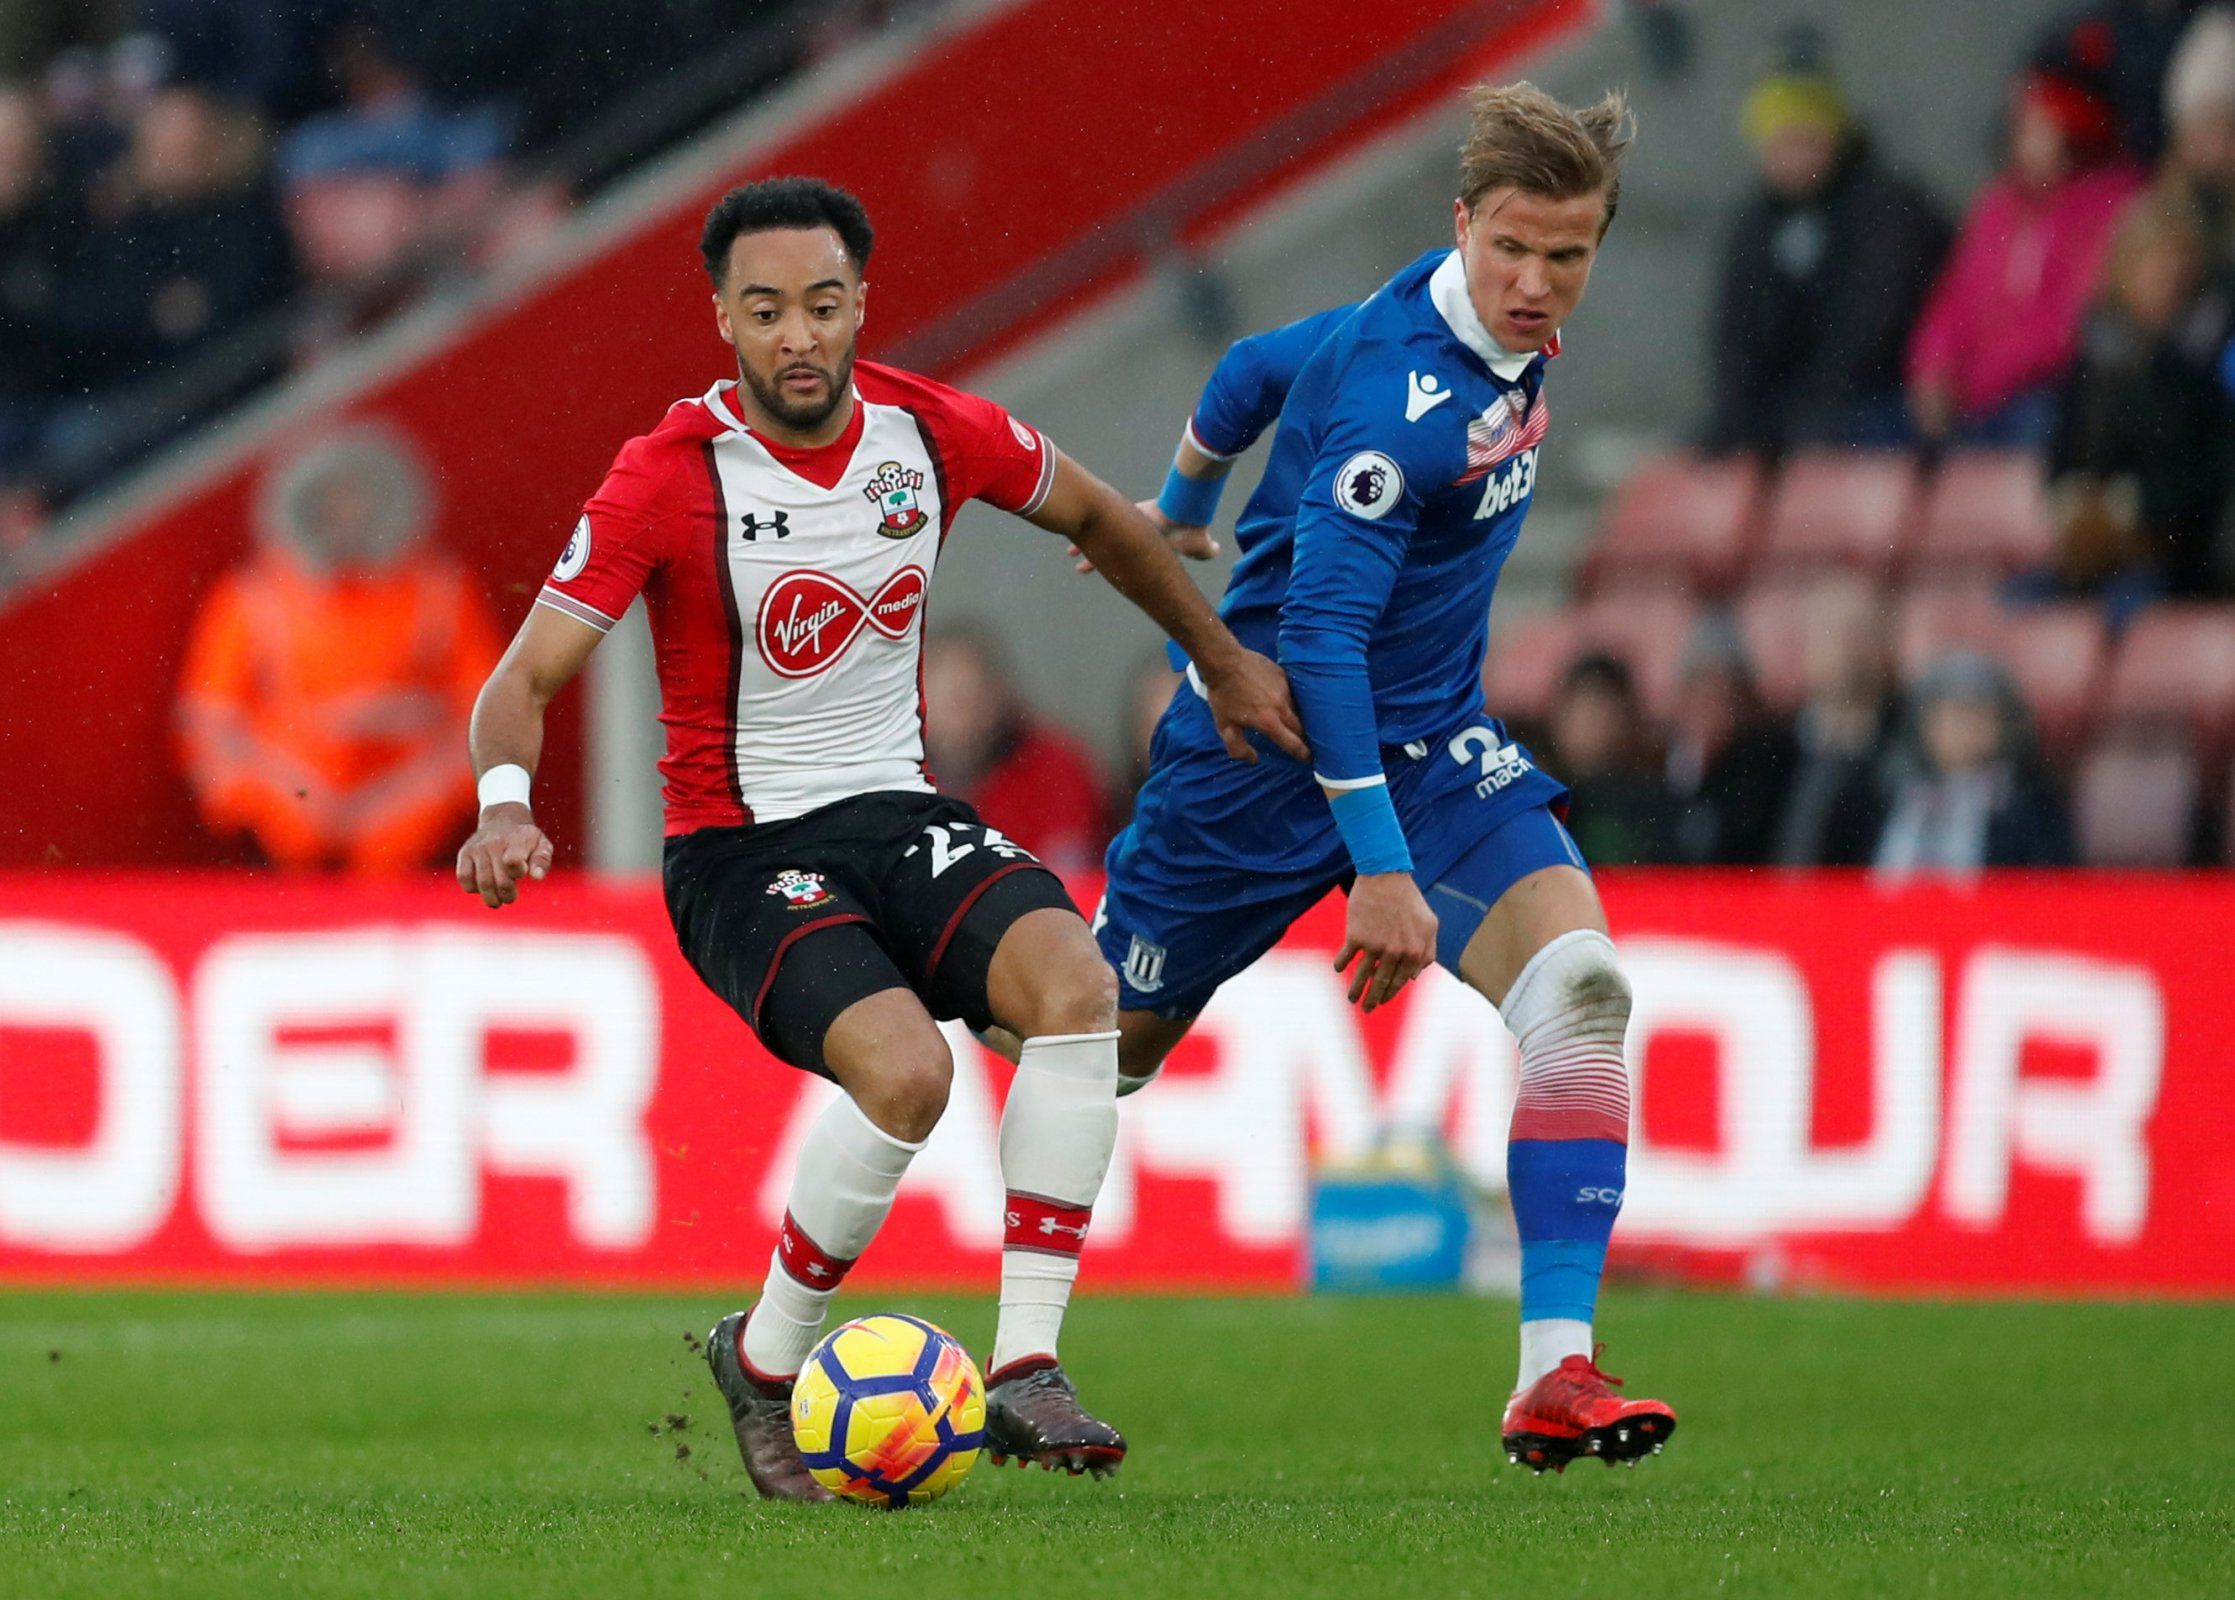 Southampton winger Nathan Redmond in action against Stoke